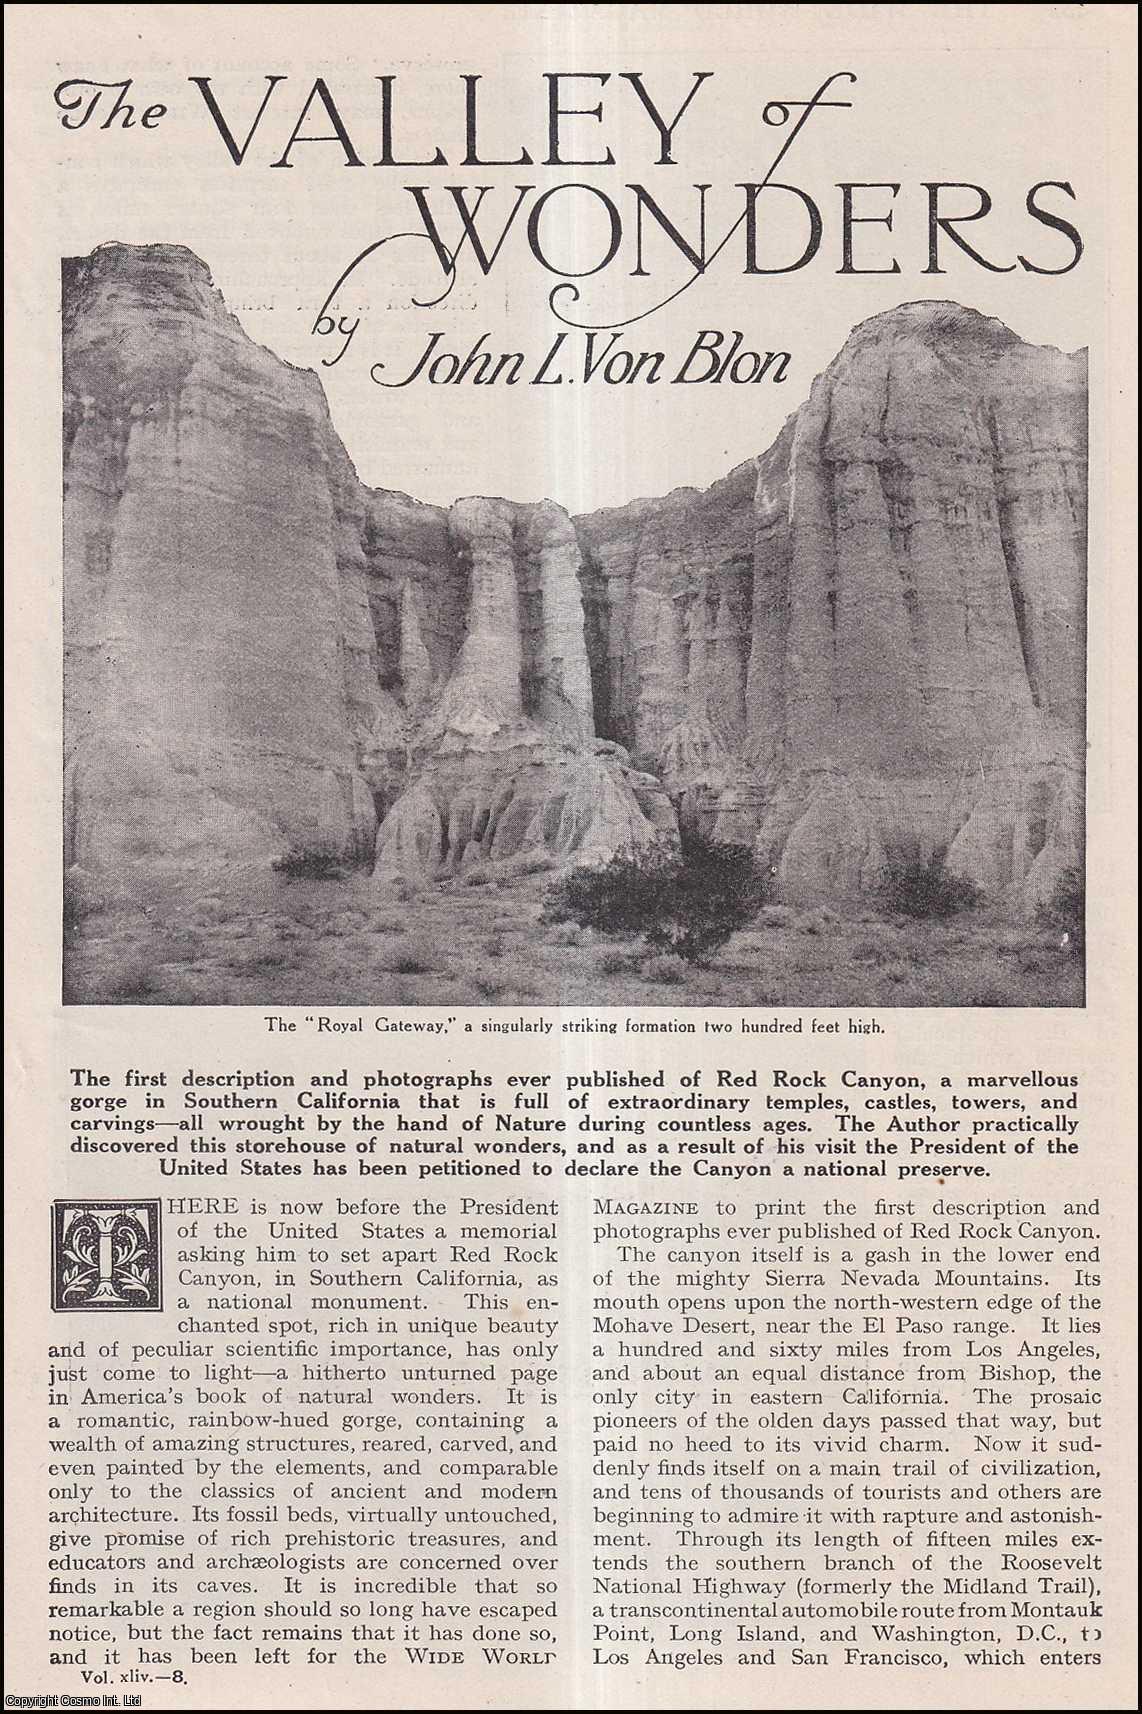 John L. von Blon - The Valley of Wonders; Red Rock Canyon in Southern California.An uncommon original article from the Wide World Magazine, 1919.